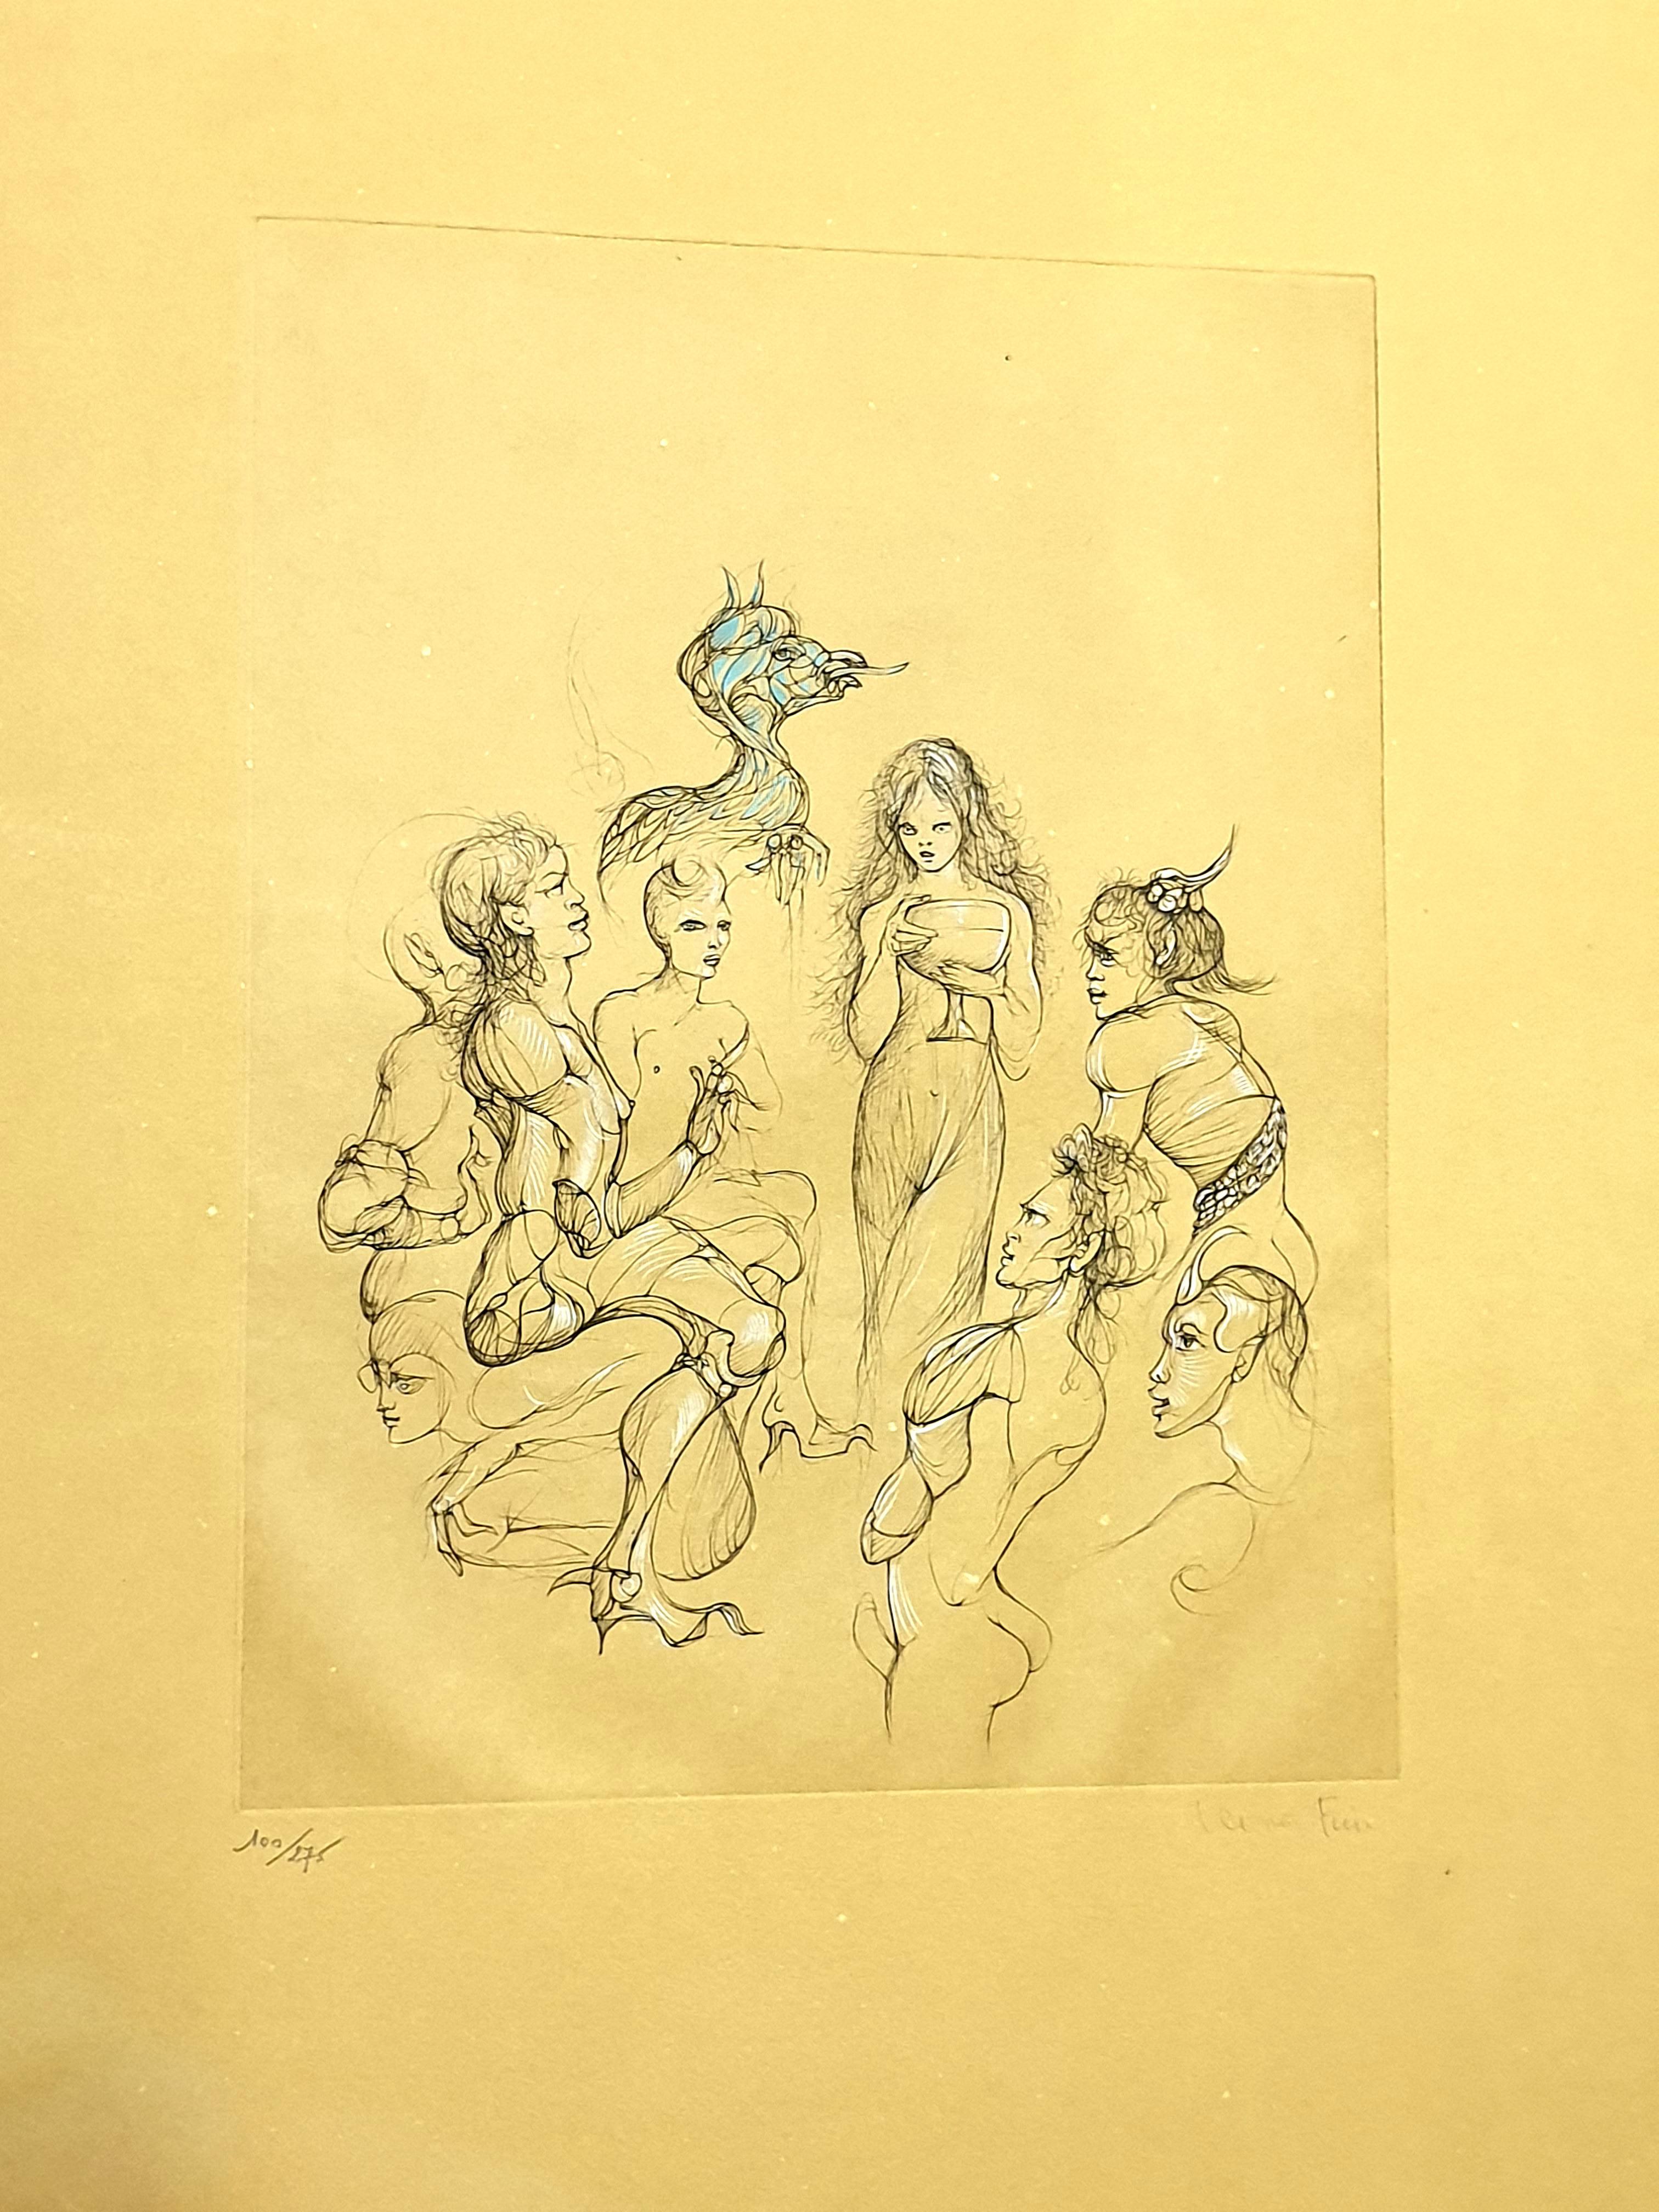 Leonor Fini - Nimphs - Original Handsigned Lithograph
Circa 1982
On colored paper
Handsigned and Numbered
Edition: 275
Dimensions: 69 x 52.5 cm